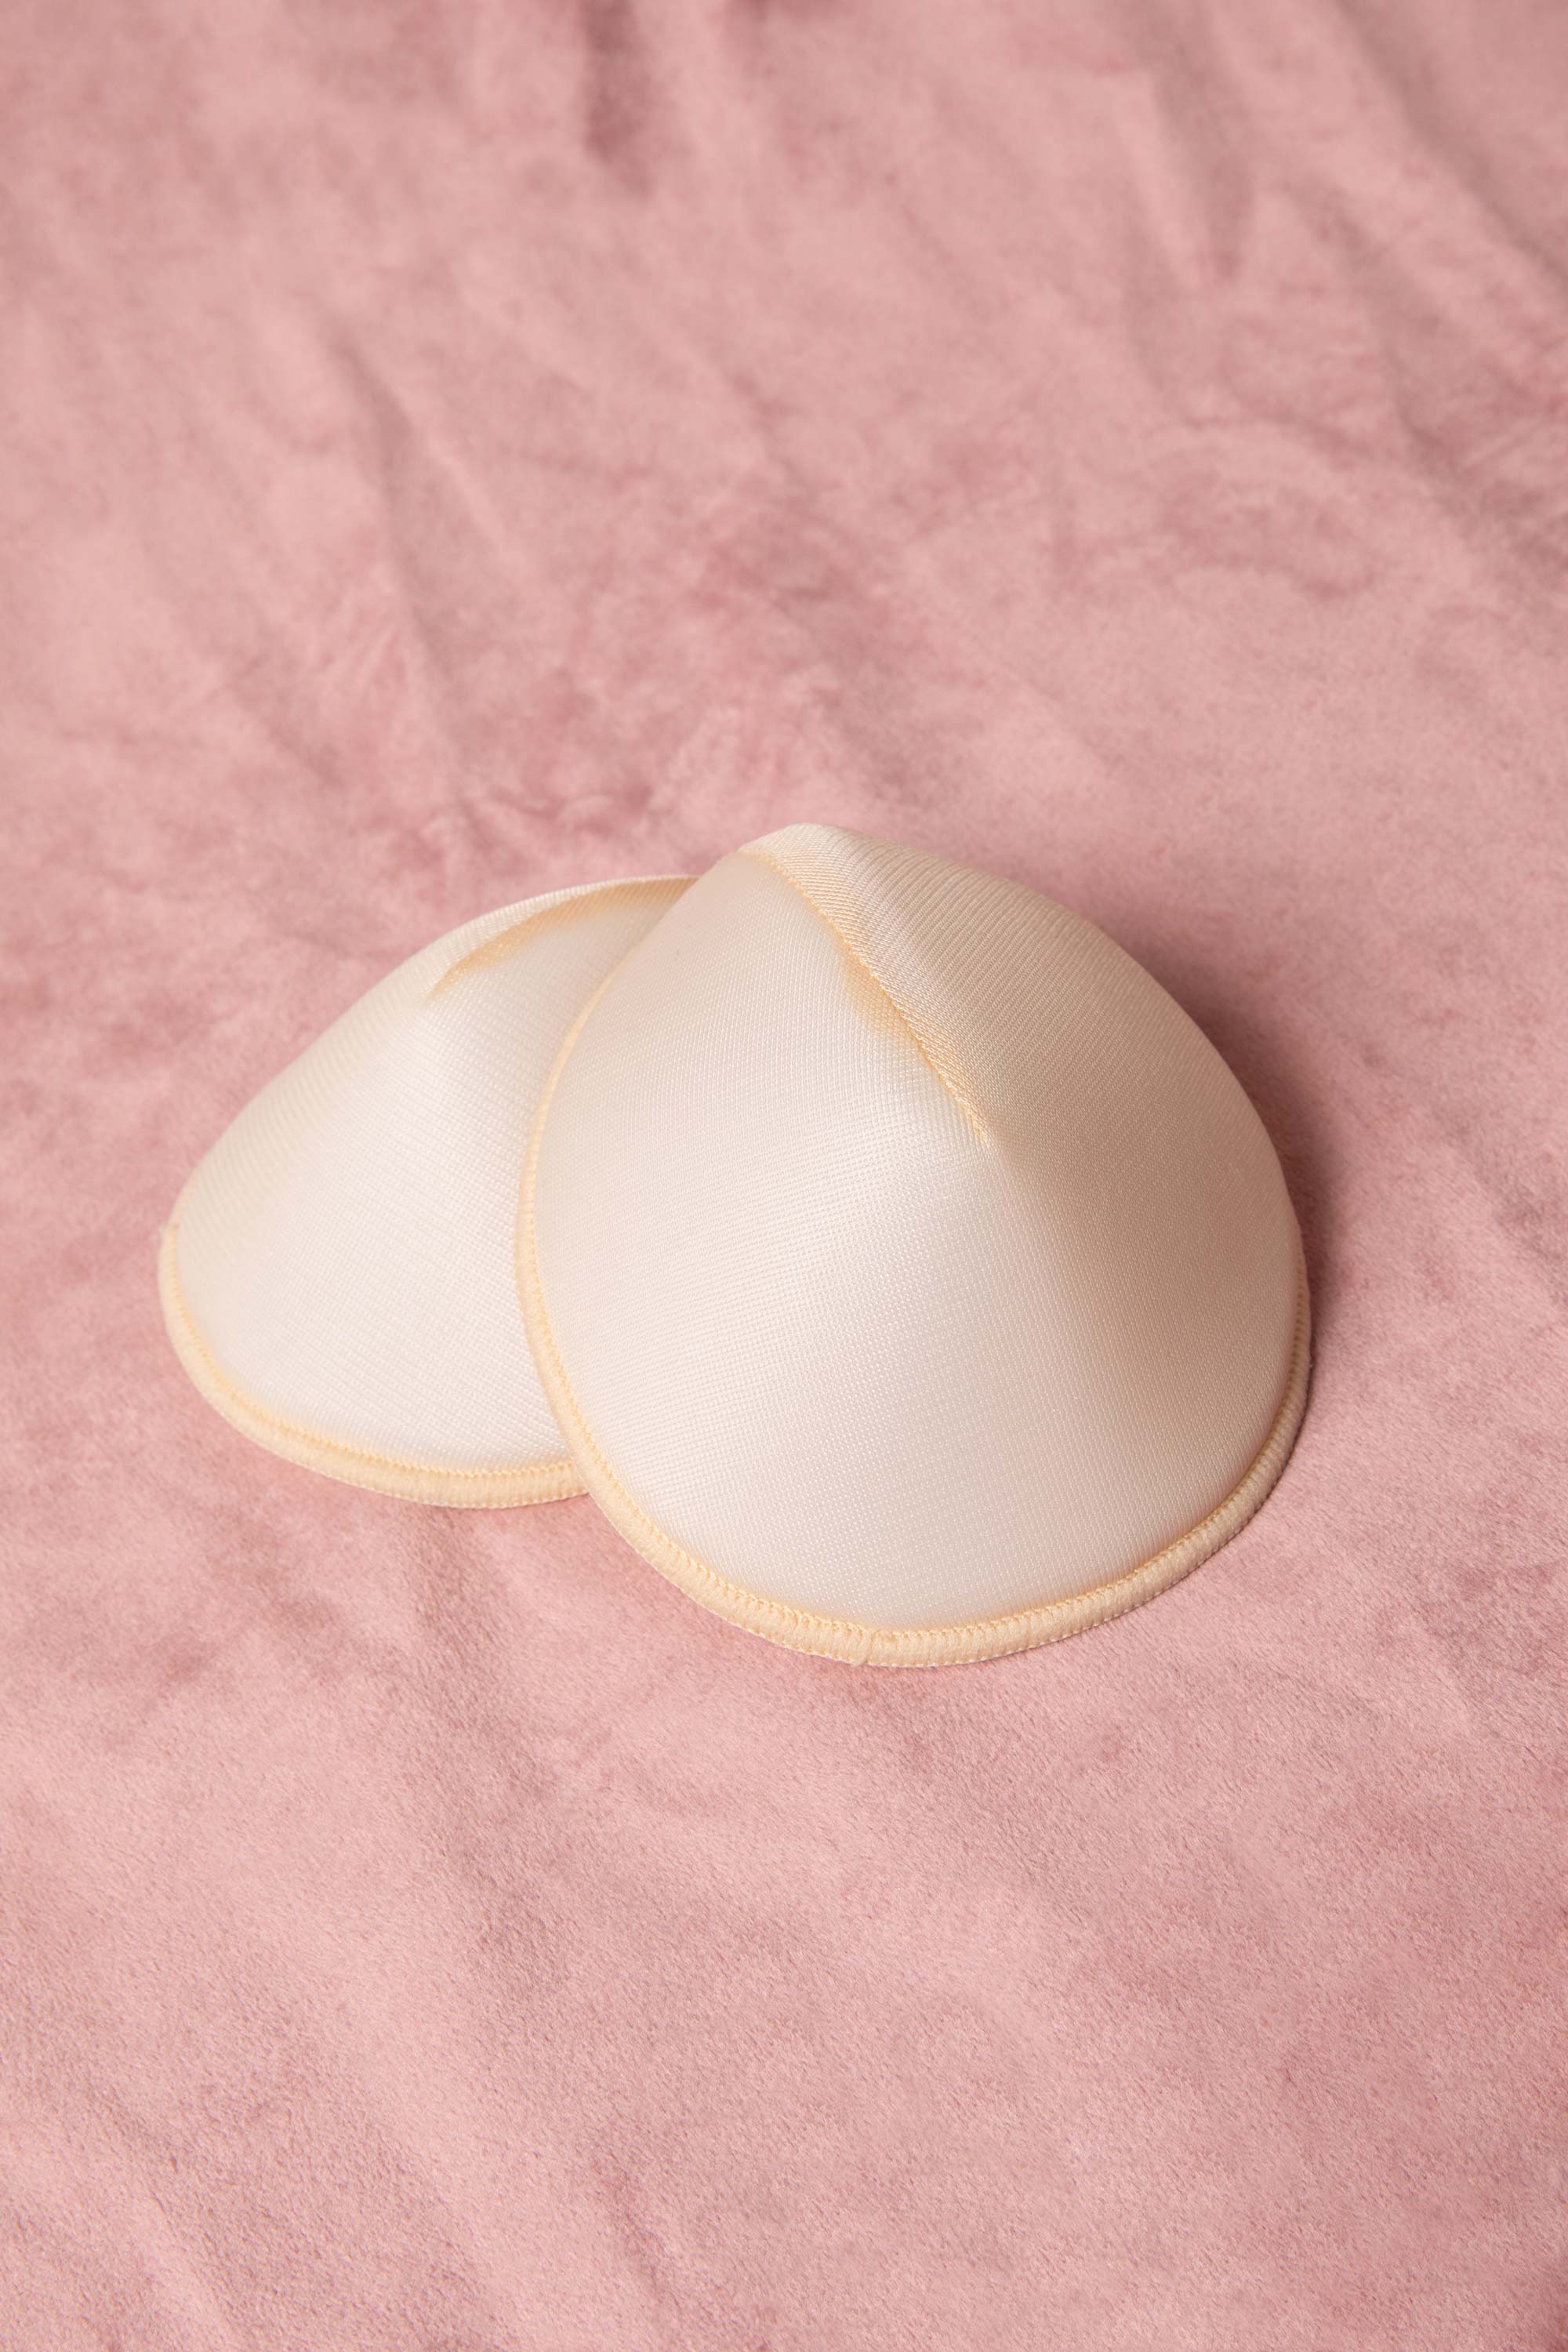 bullet bra pads - Buy bullet bra pads with free shipping on AliExpress